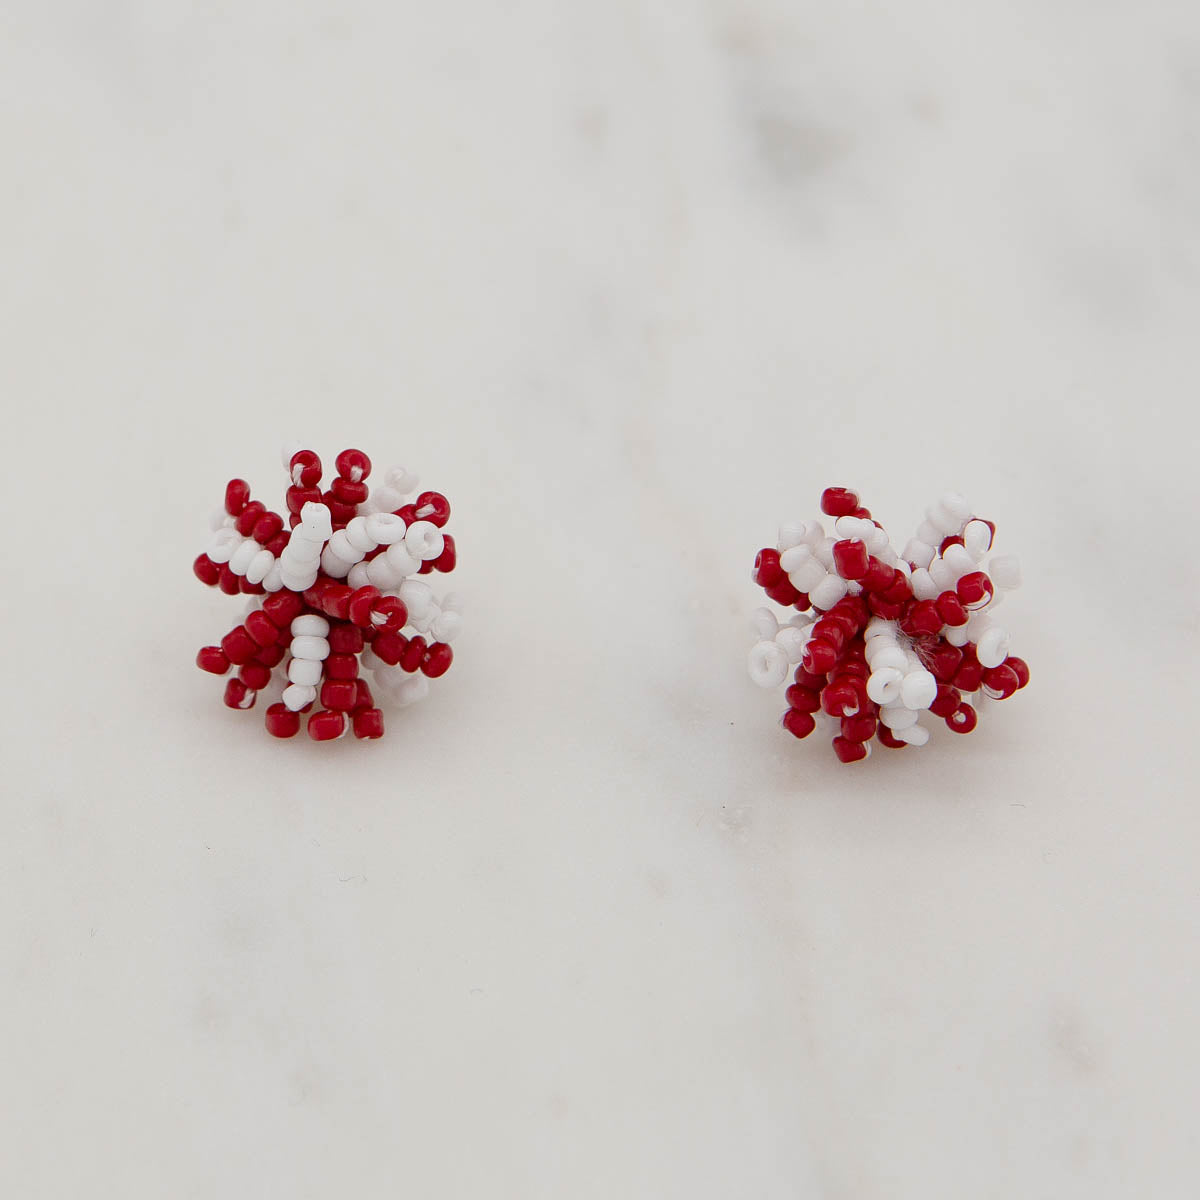 Red and White Pom Pom Stud Earrings